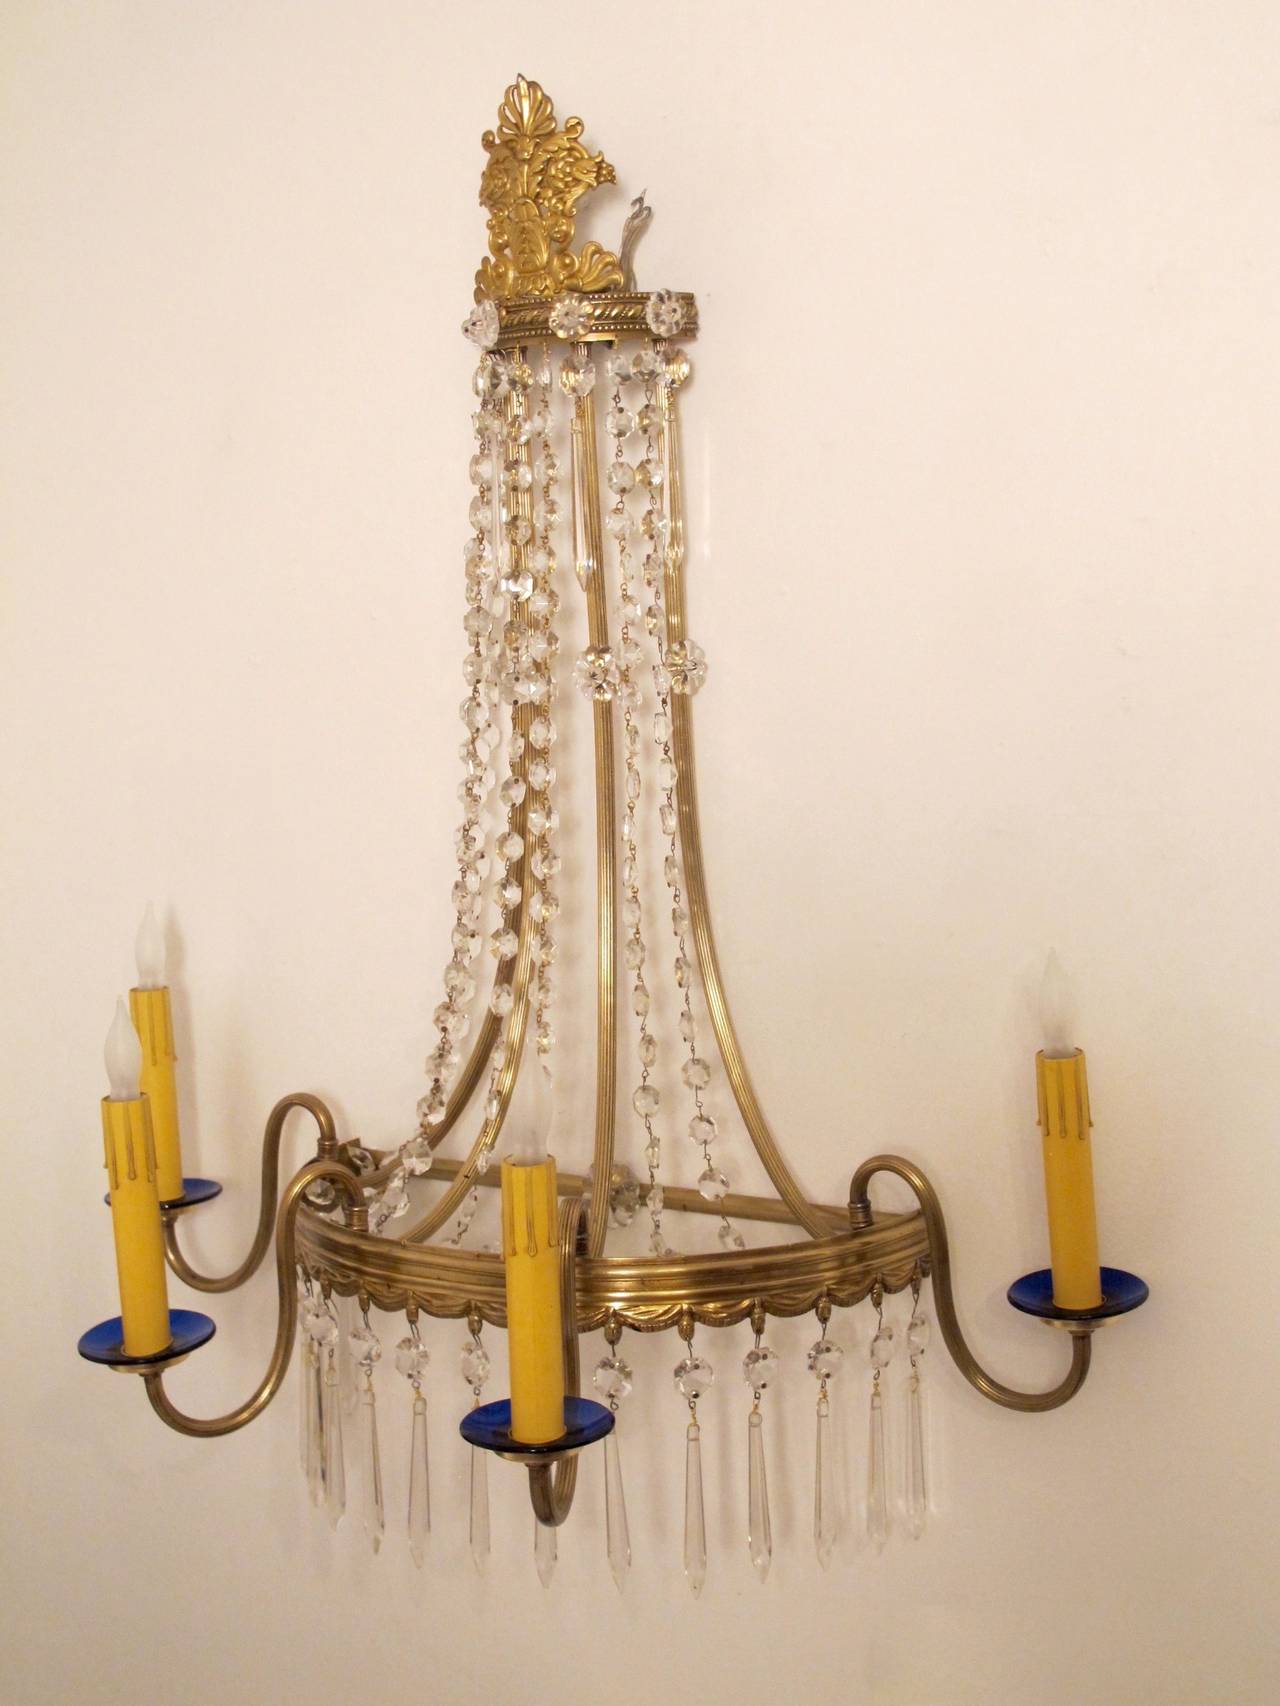 Fancy brass wall sconce with glass swags, crystal pendants and cobalt blue glass bobeches. Newly re-wired.